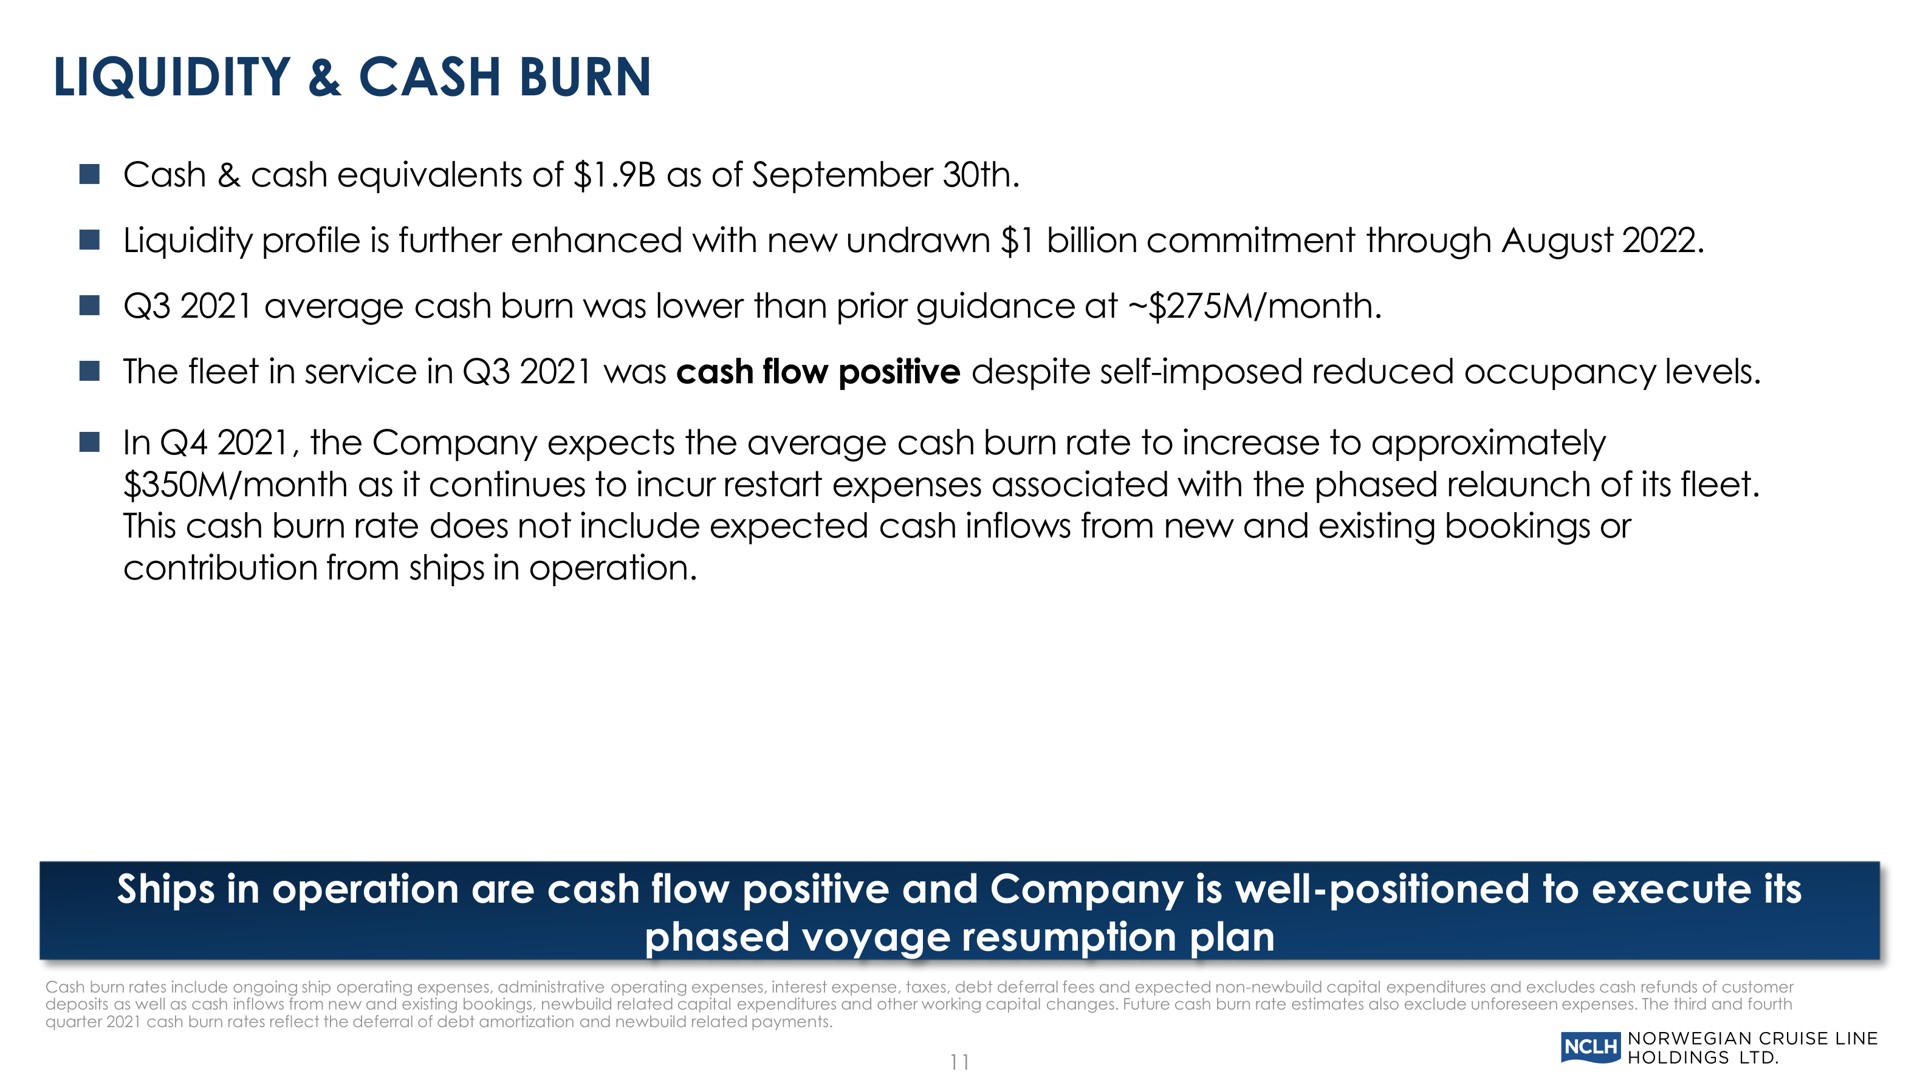 liquidity cash burn cash cash equivalents of as of liquidity profile is further enhanced with new undrawn billion commitment through august average cash burn was lower than prior guidance at month the fleet in service in was cash flow positive despite self imposed reduced occupancy levels in the company expects the average cash burn rate to increase to approximately month as it continues to incur restart expenses associated with the phased relaunch of its fleet this cash burn rate does not include expected cash inflows from new and existing bookings or contribution from ships in operation ships in operation are cash flow positive and company is well positioned to execute its phased voyage resumption plan | Norwegian Cruise Line